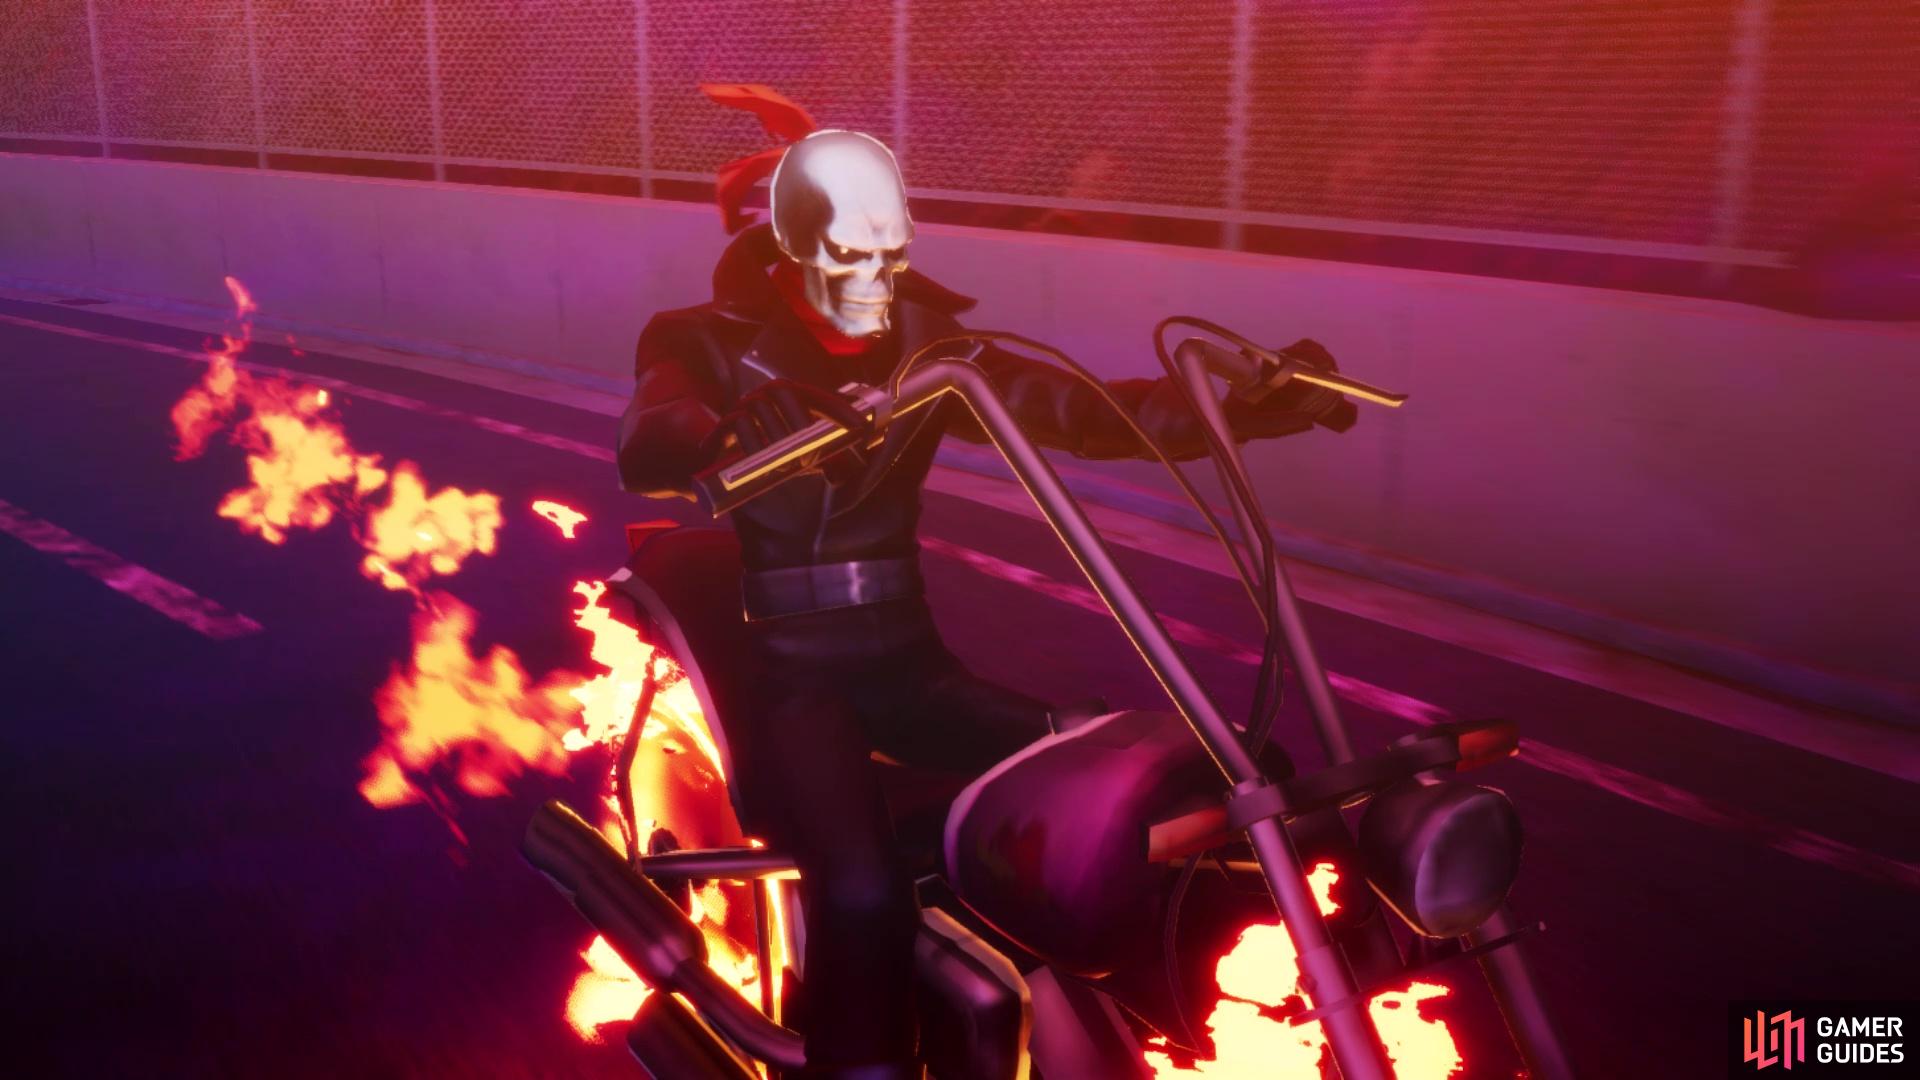 Hell Biker will make quite the entrance